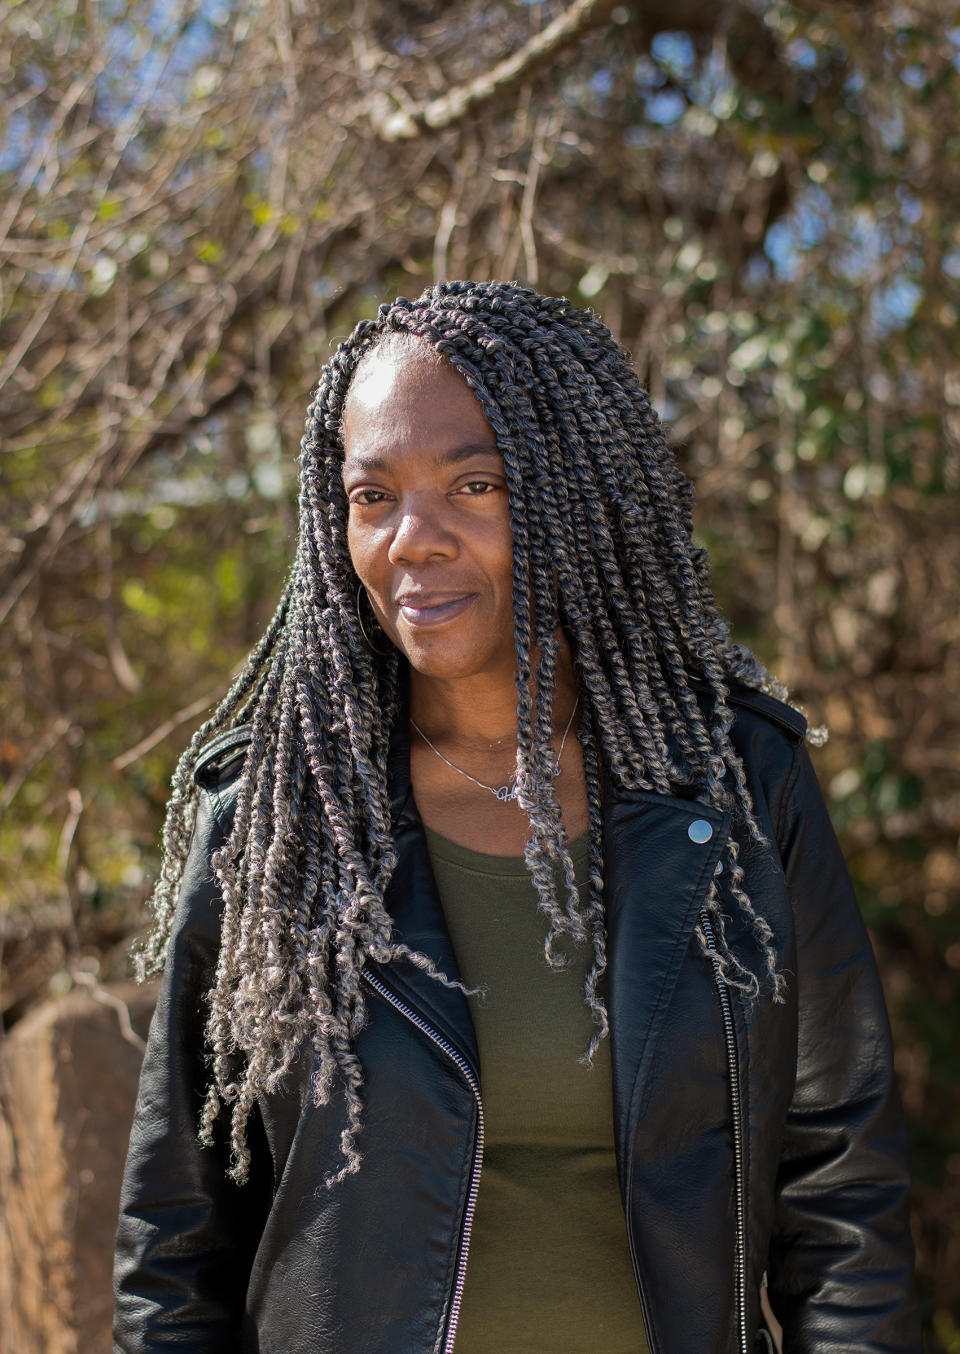 Stacey Hopkins in Atlanta, on Feb. 3, 2020. | Irina Rozovsky for TIME